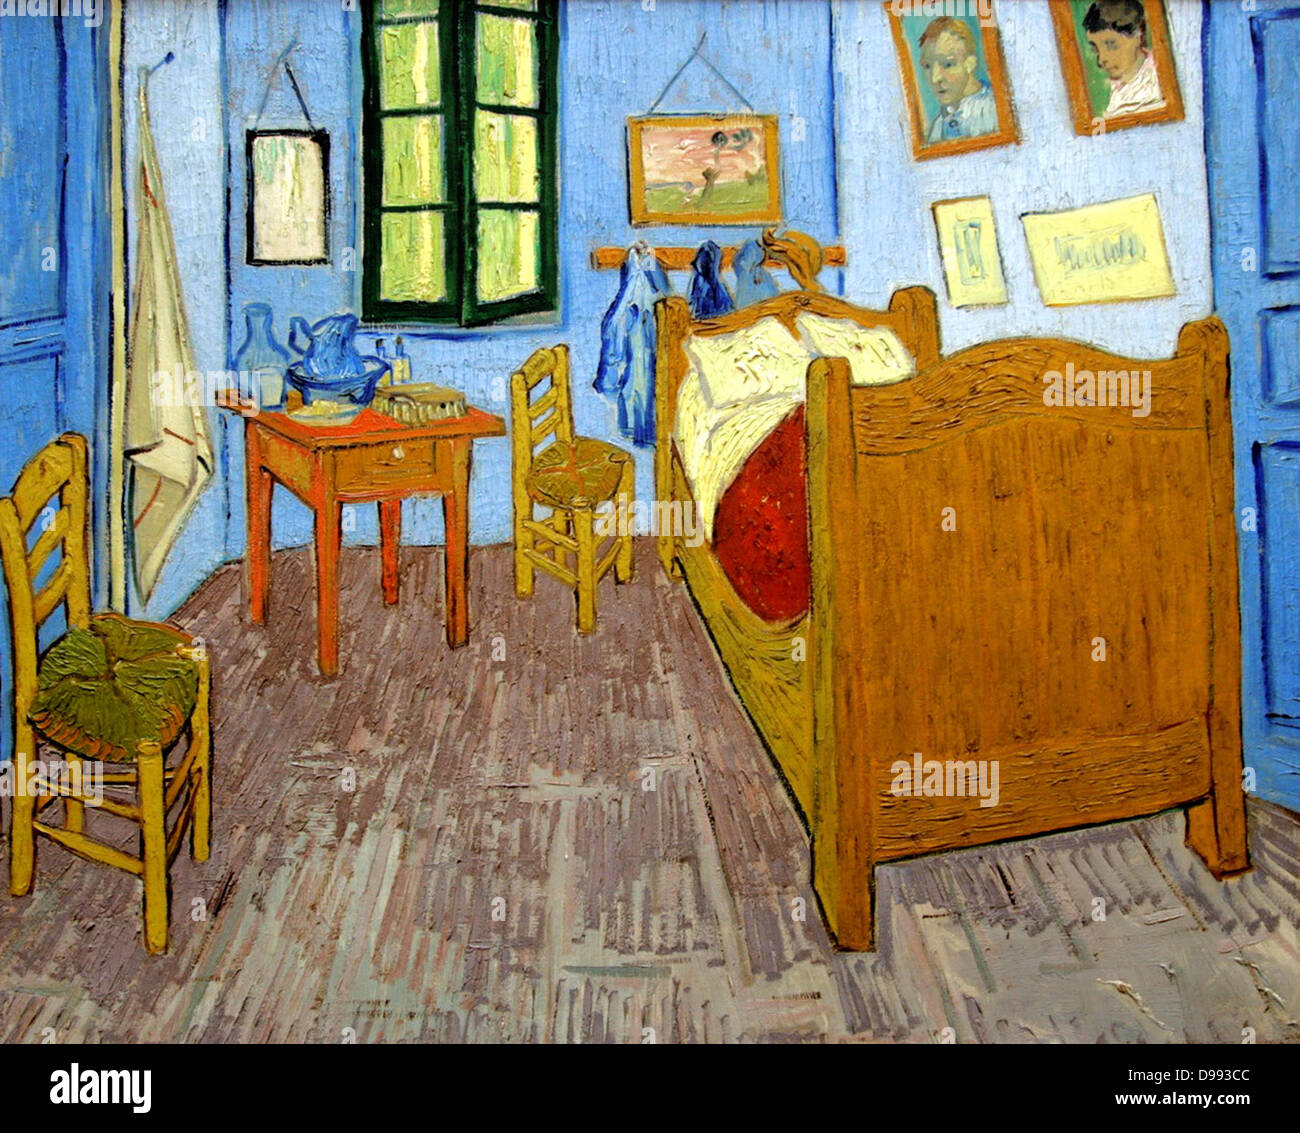 Vincent Van Gogh (1853 – 1890) Dutch post-Impressionist painter. Van Gogh suffered from mental illness and died from a self-inflicted gunshot wound. 'Bedroom at Arles', 1889 Stock Photo